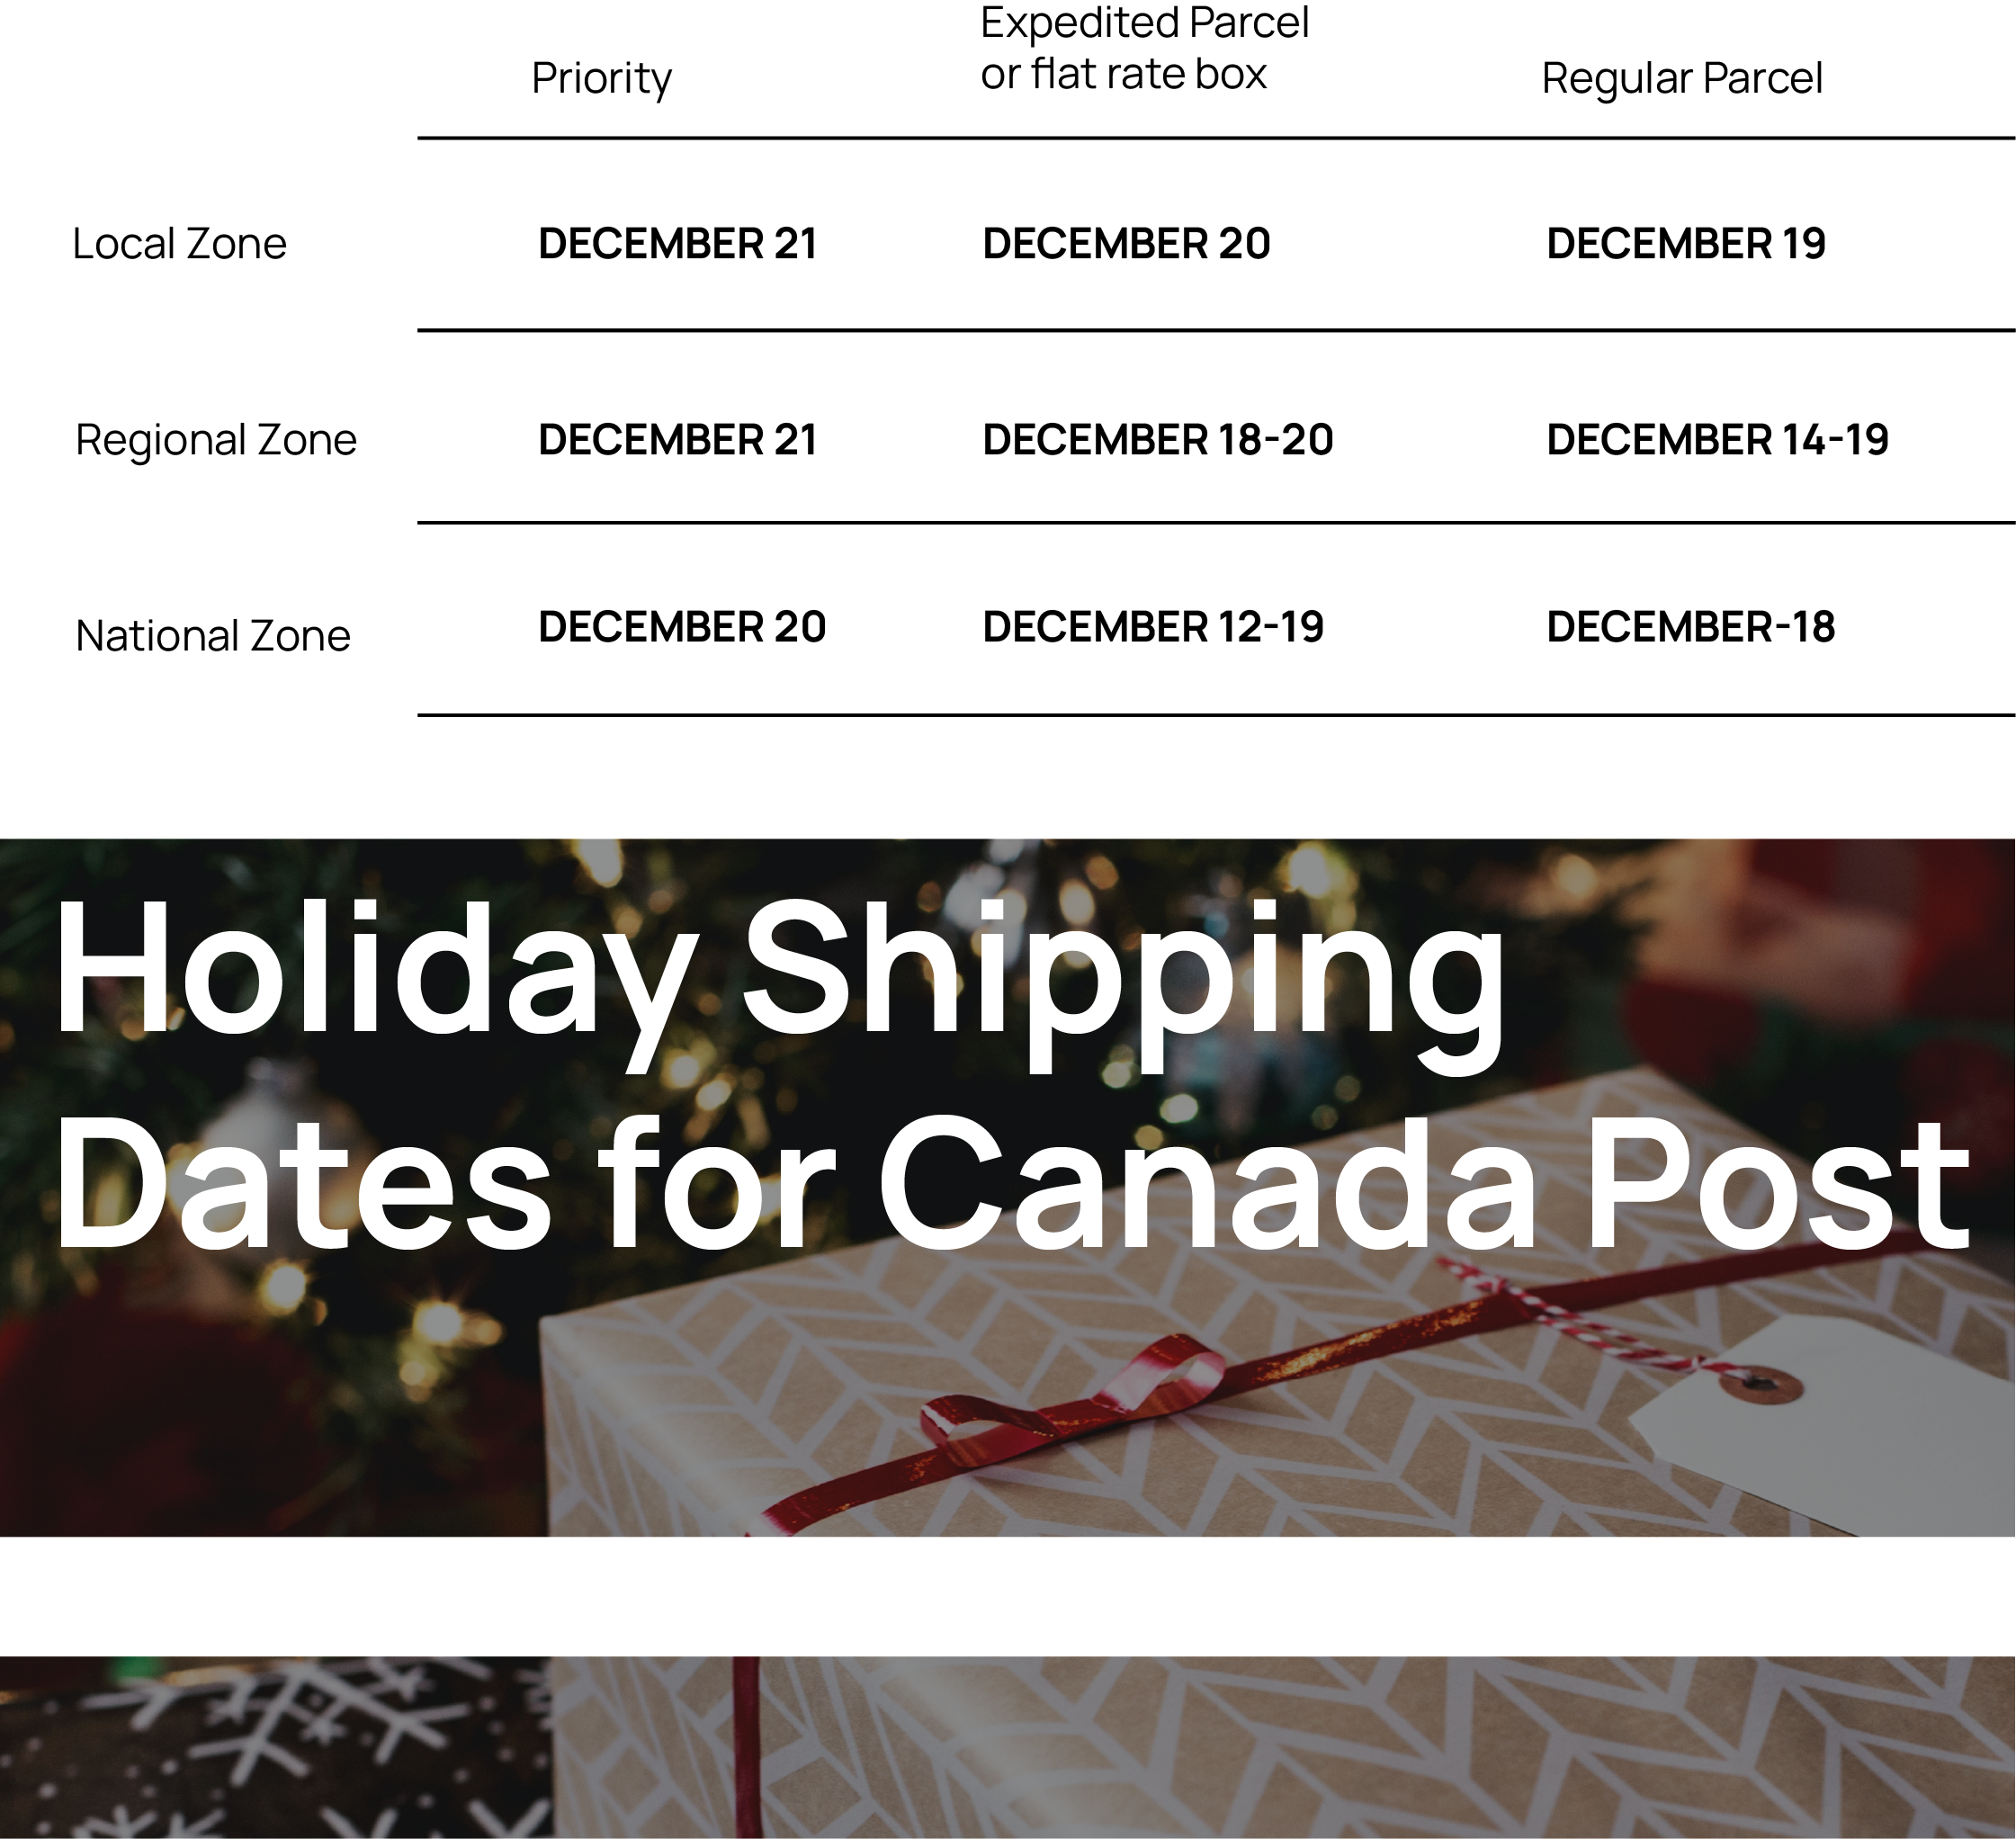 Holiday shipping dates for canada post.